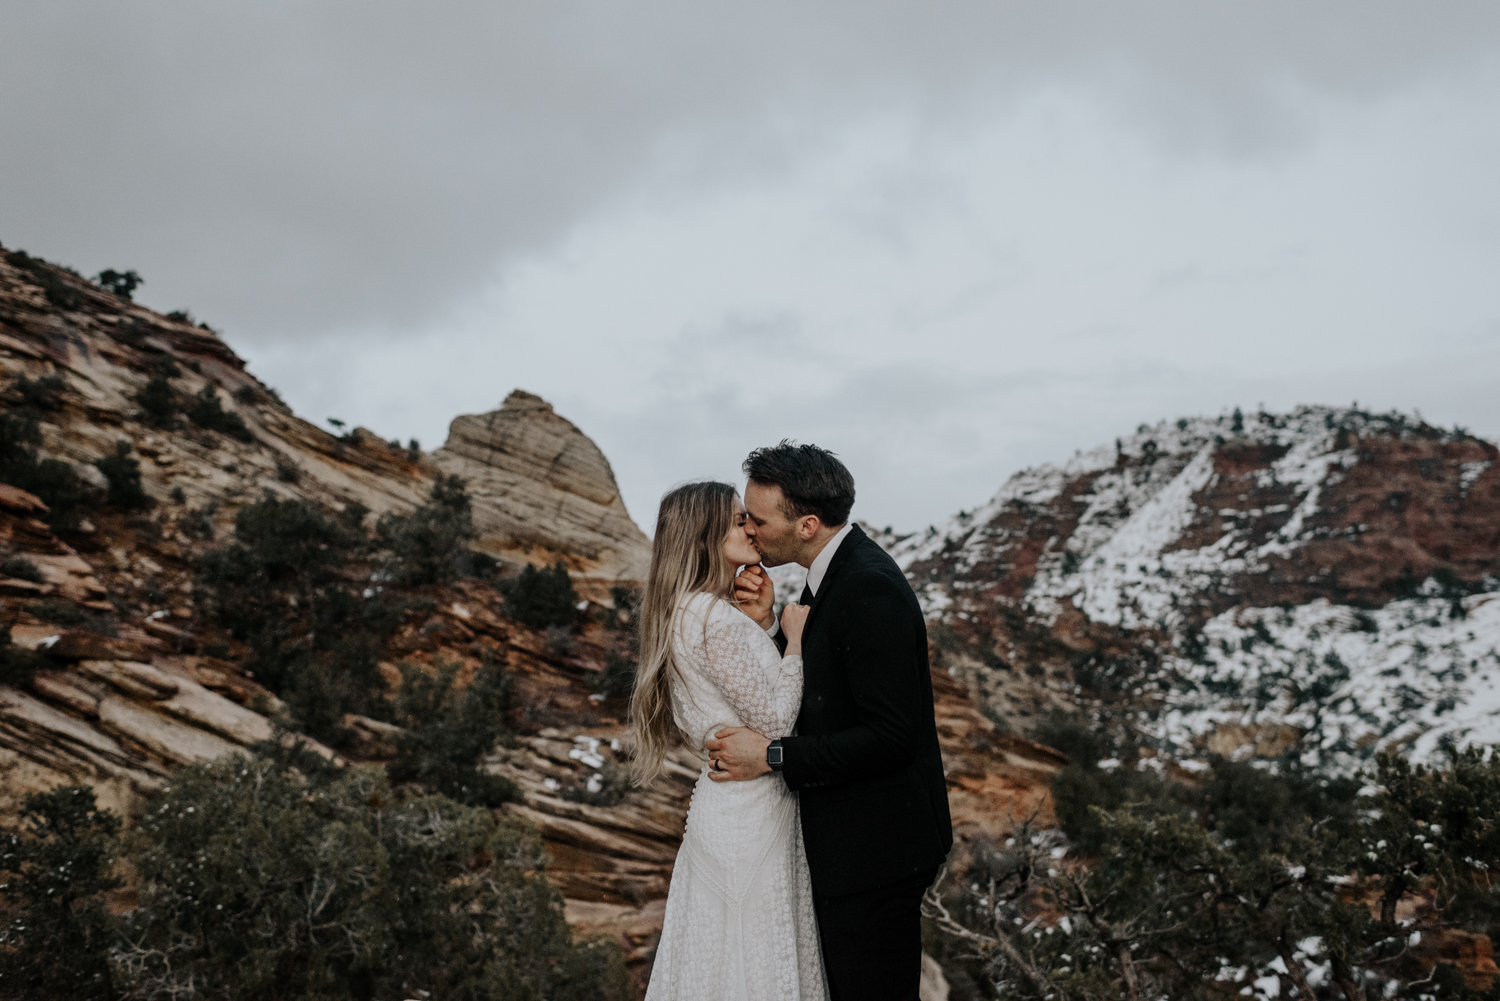 Best Location for Couples photos at Zion Park